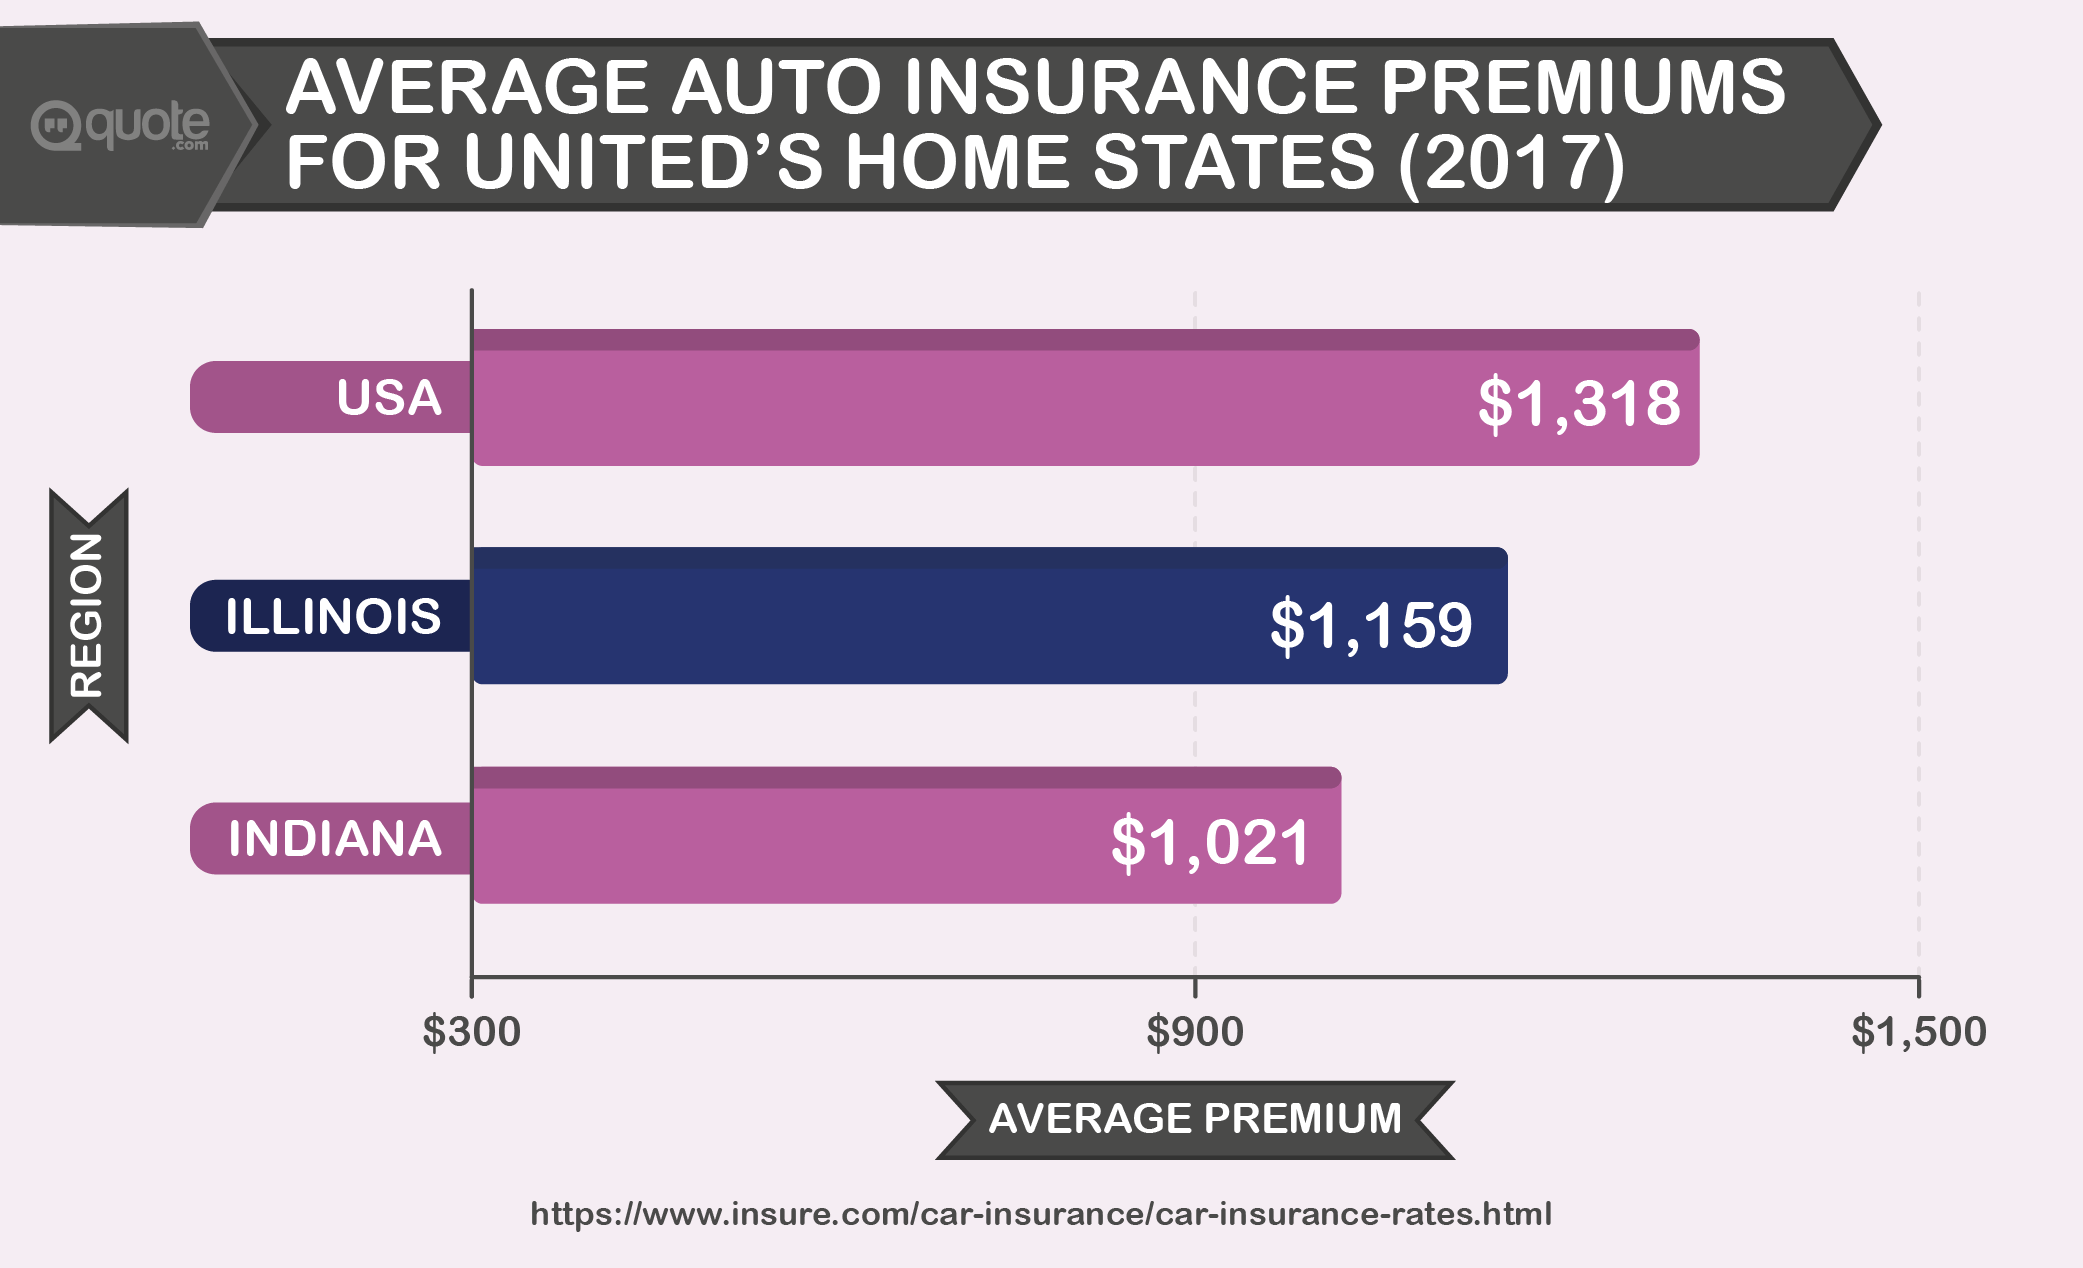 Average Auto Insurance Premiums for United's Home States